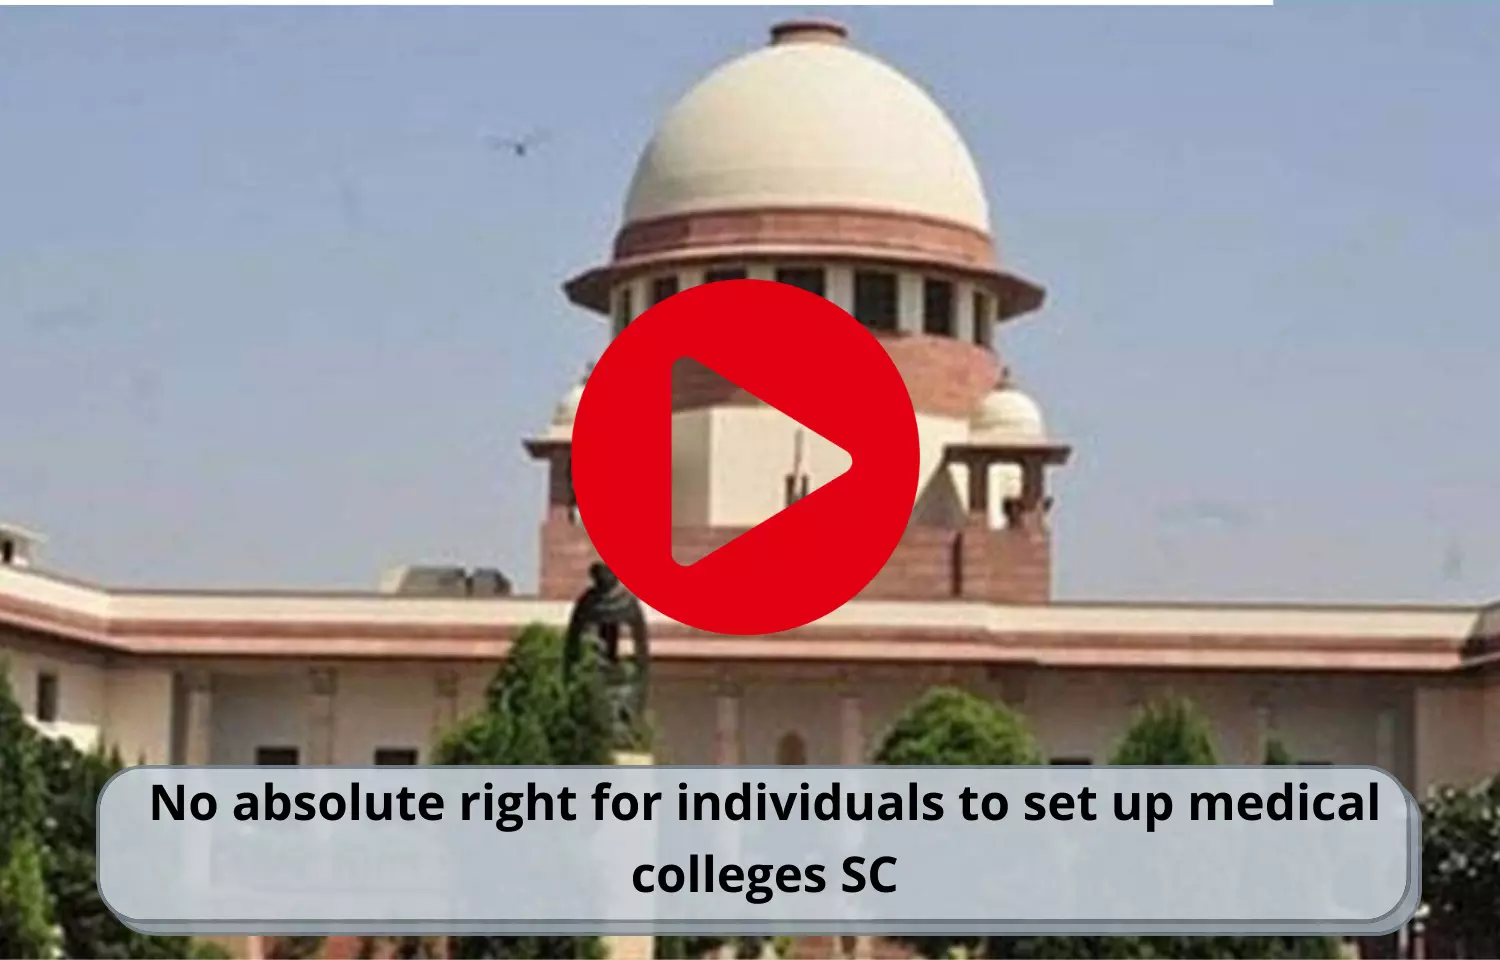 No absolute right for individuals to set up medical colleges: Supreme Court